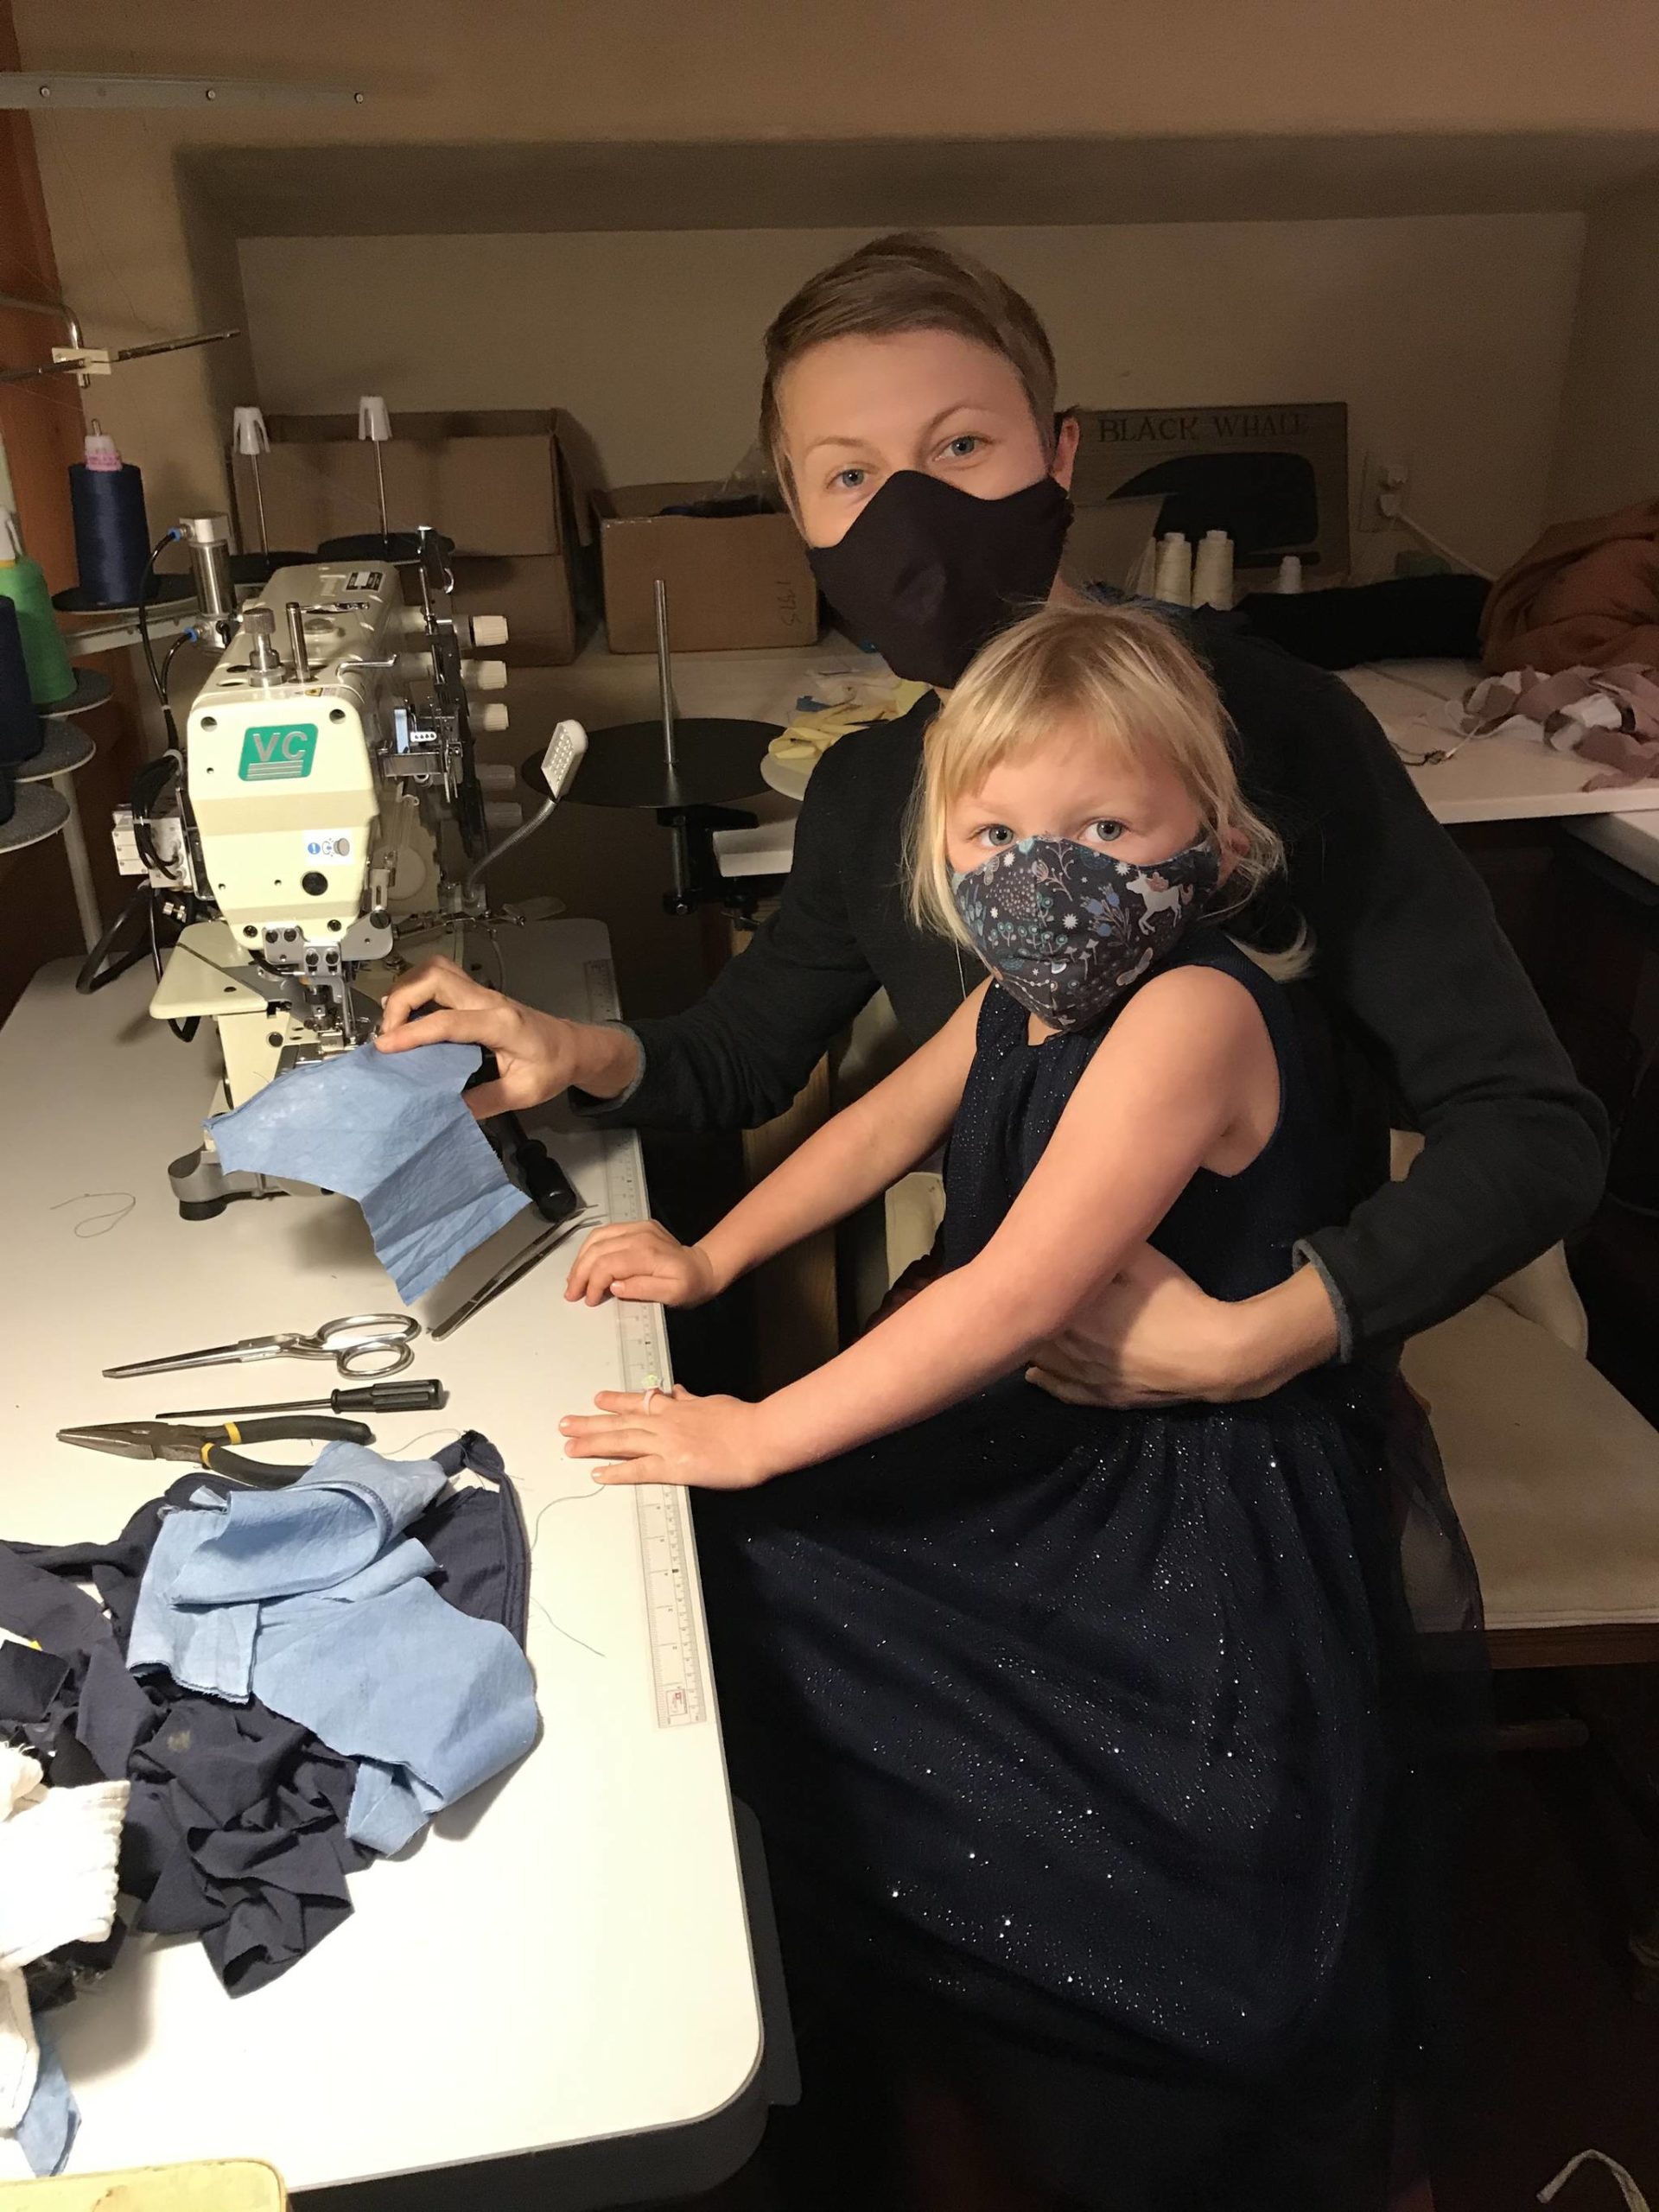 Contributed photo
Masketeers like Vasilina Mulyvania and her daughter Assata have contributed more than 4,500 sewn masks to the San Juan Island Community since March.